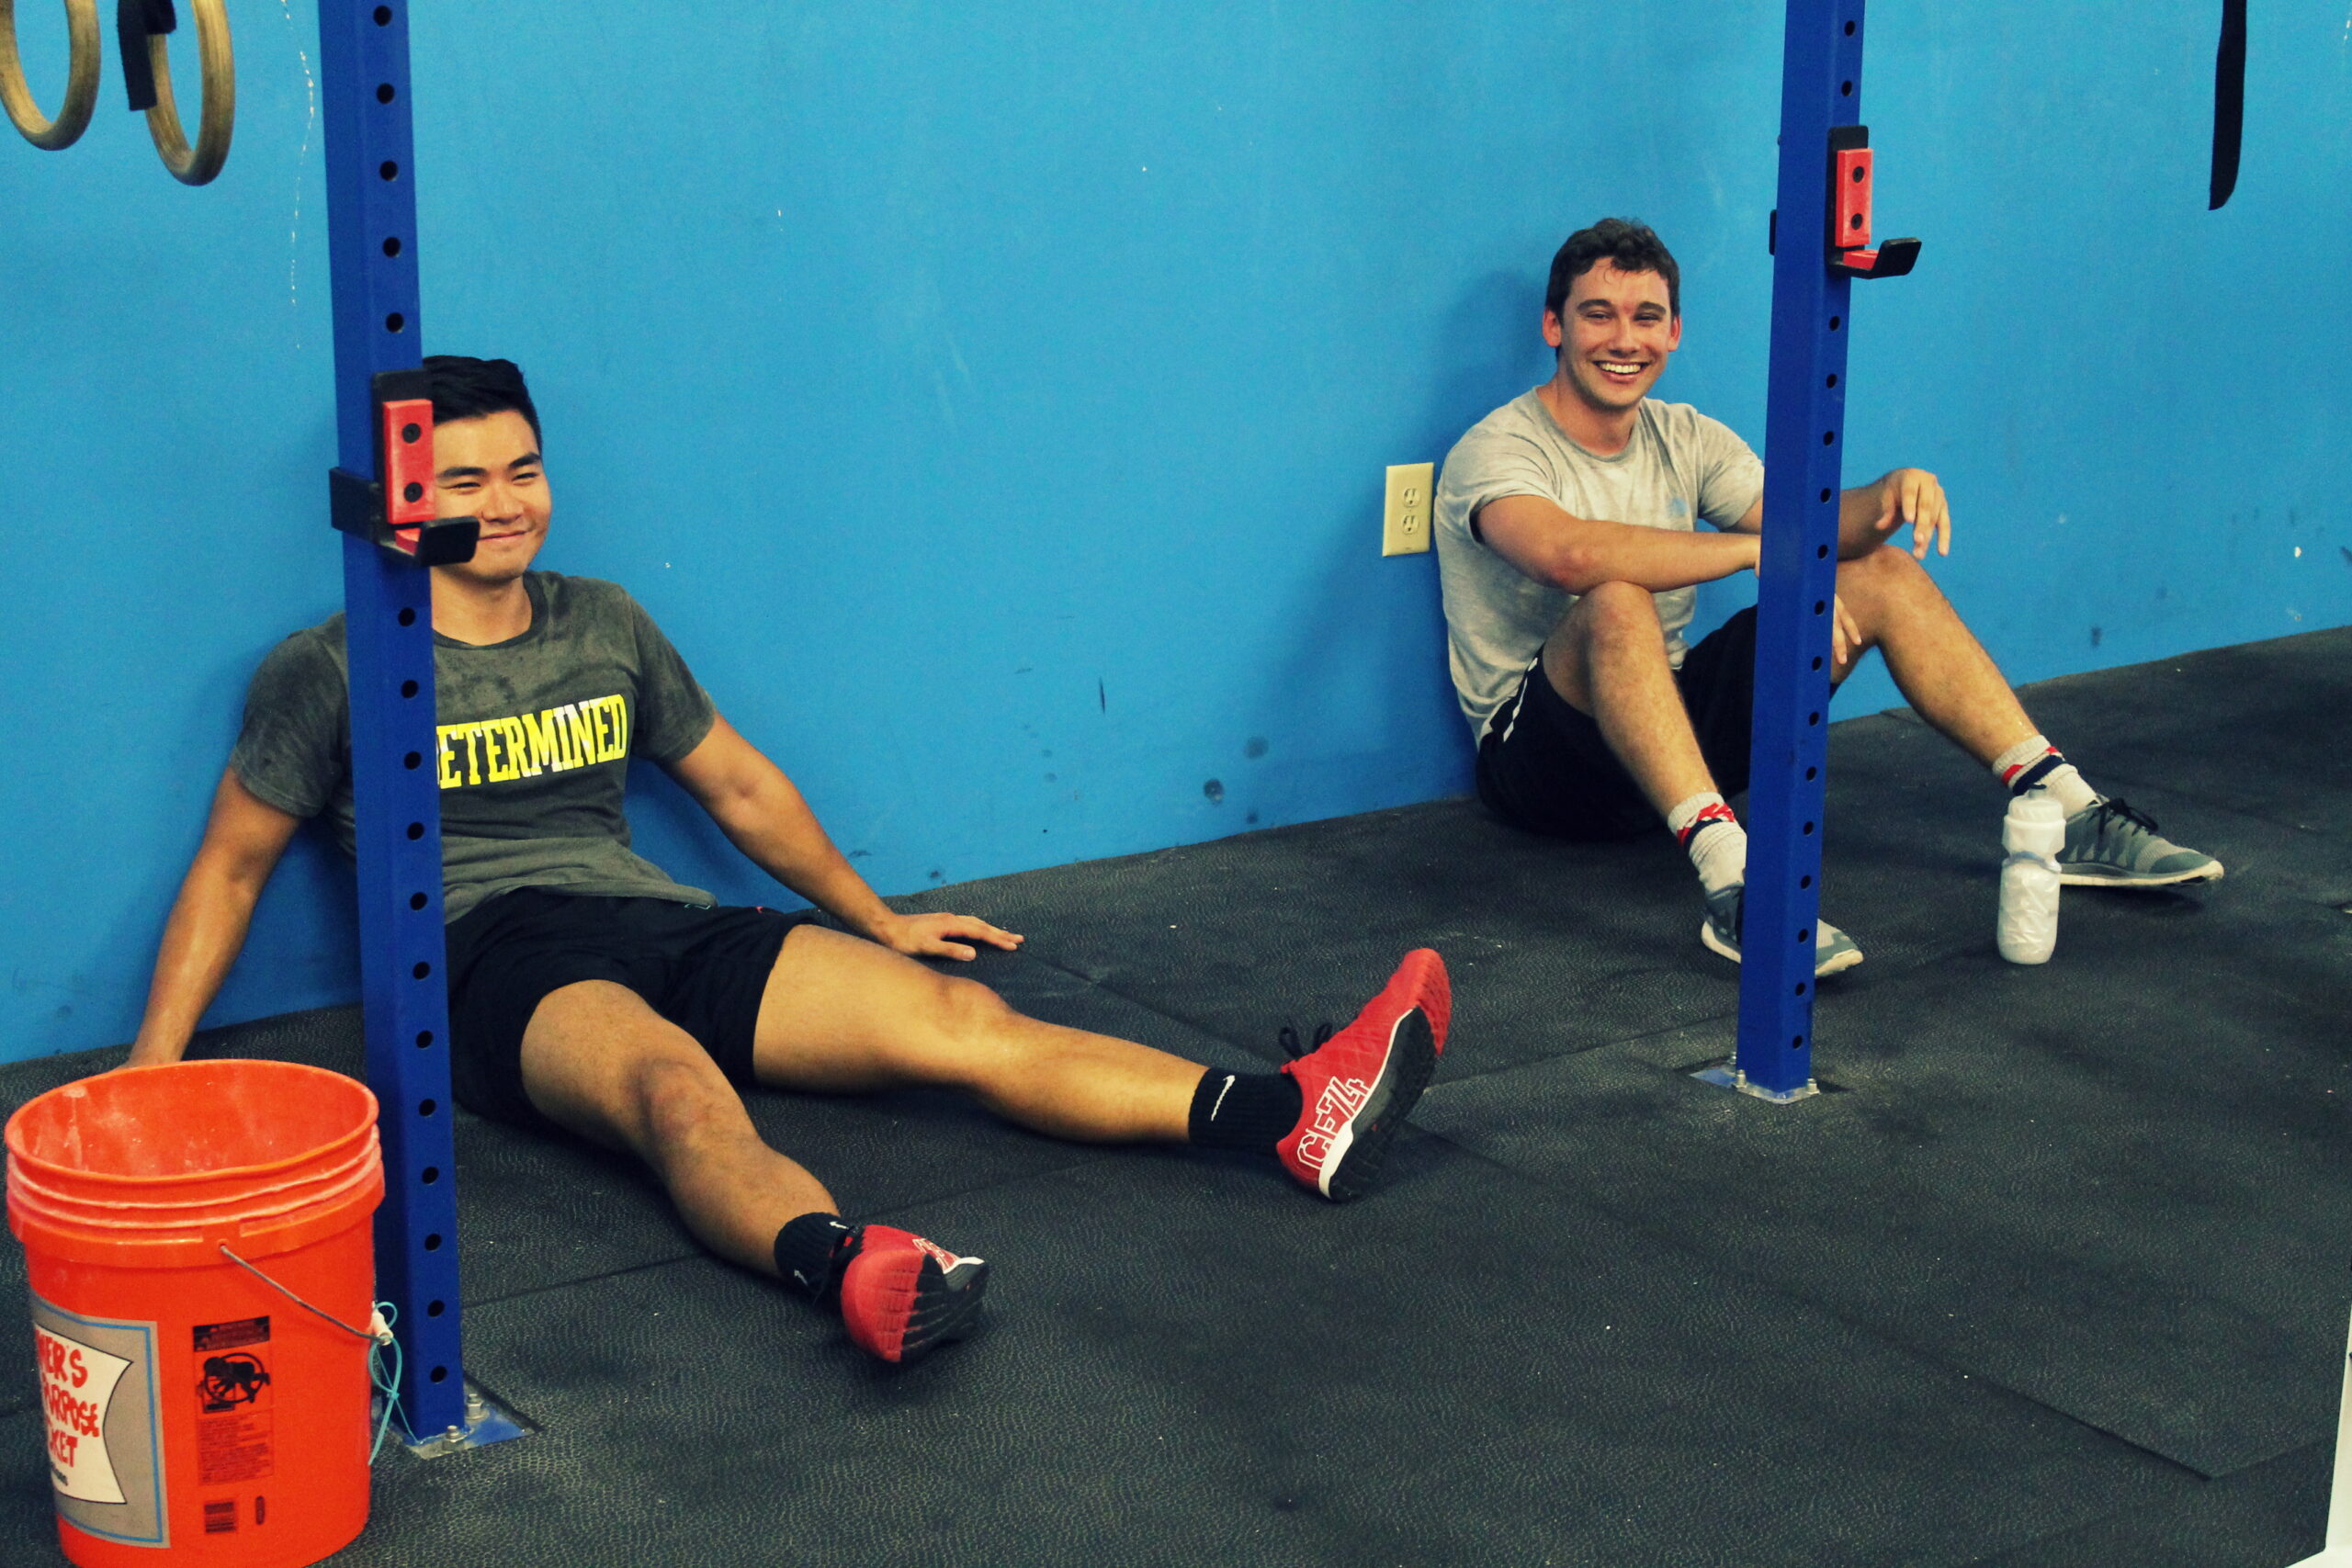 Jin and Michael relaxing after the WOD